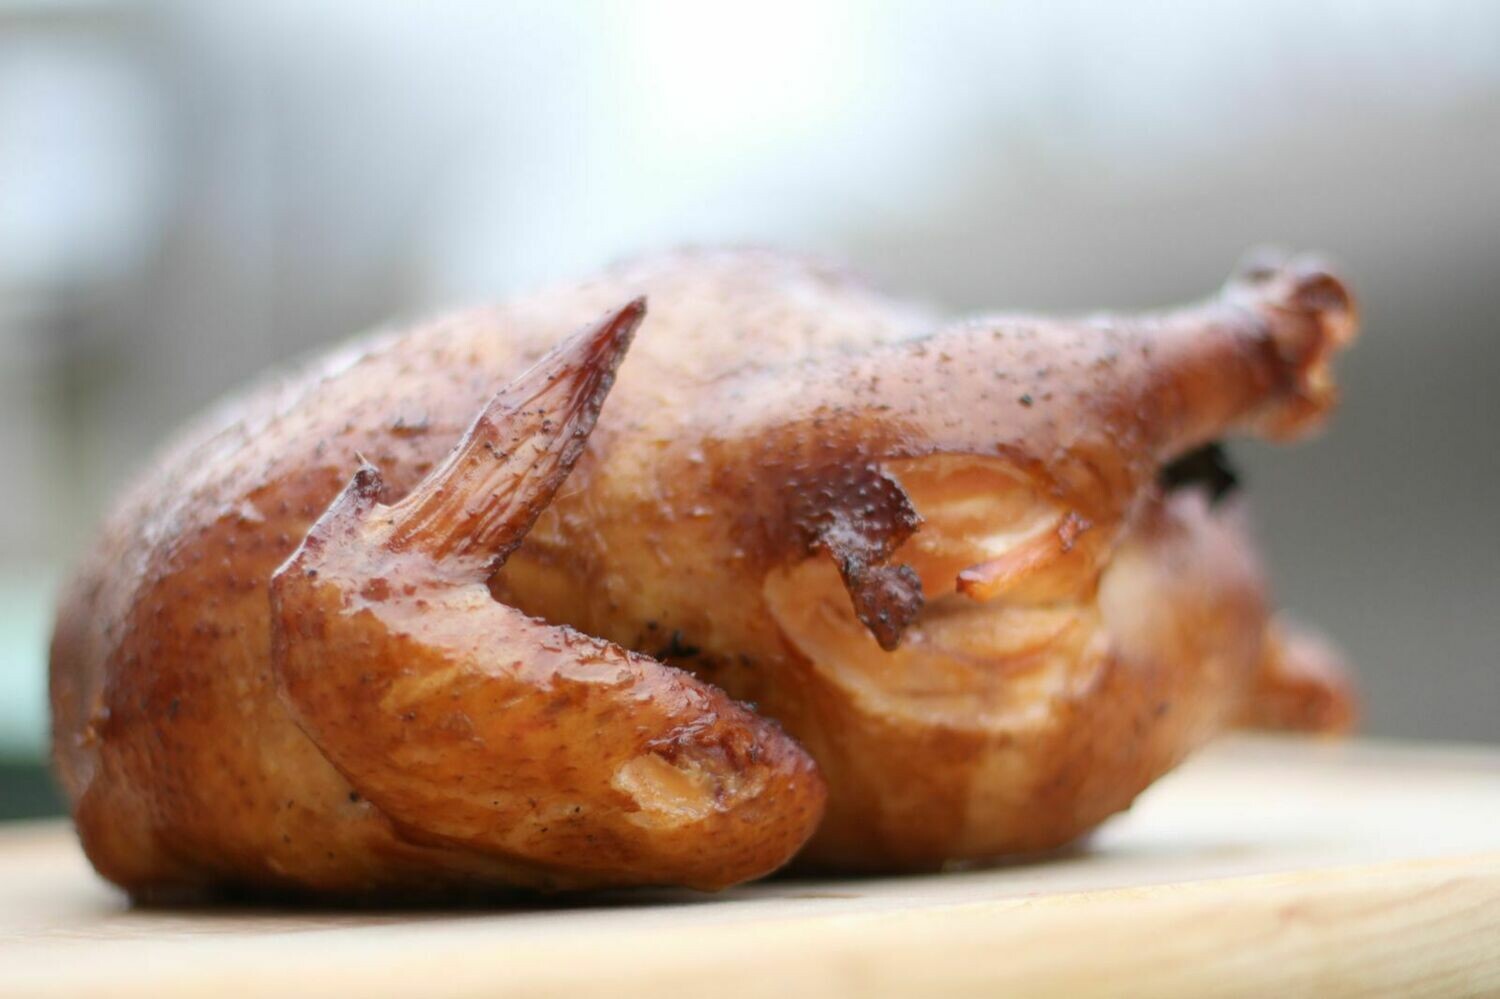 Large "Whole Smoked & Cooked Chicken" +/- 1.5kg